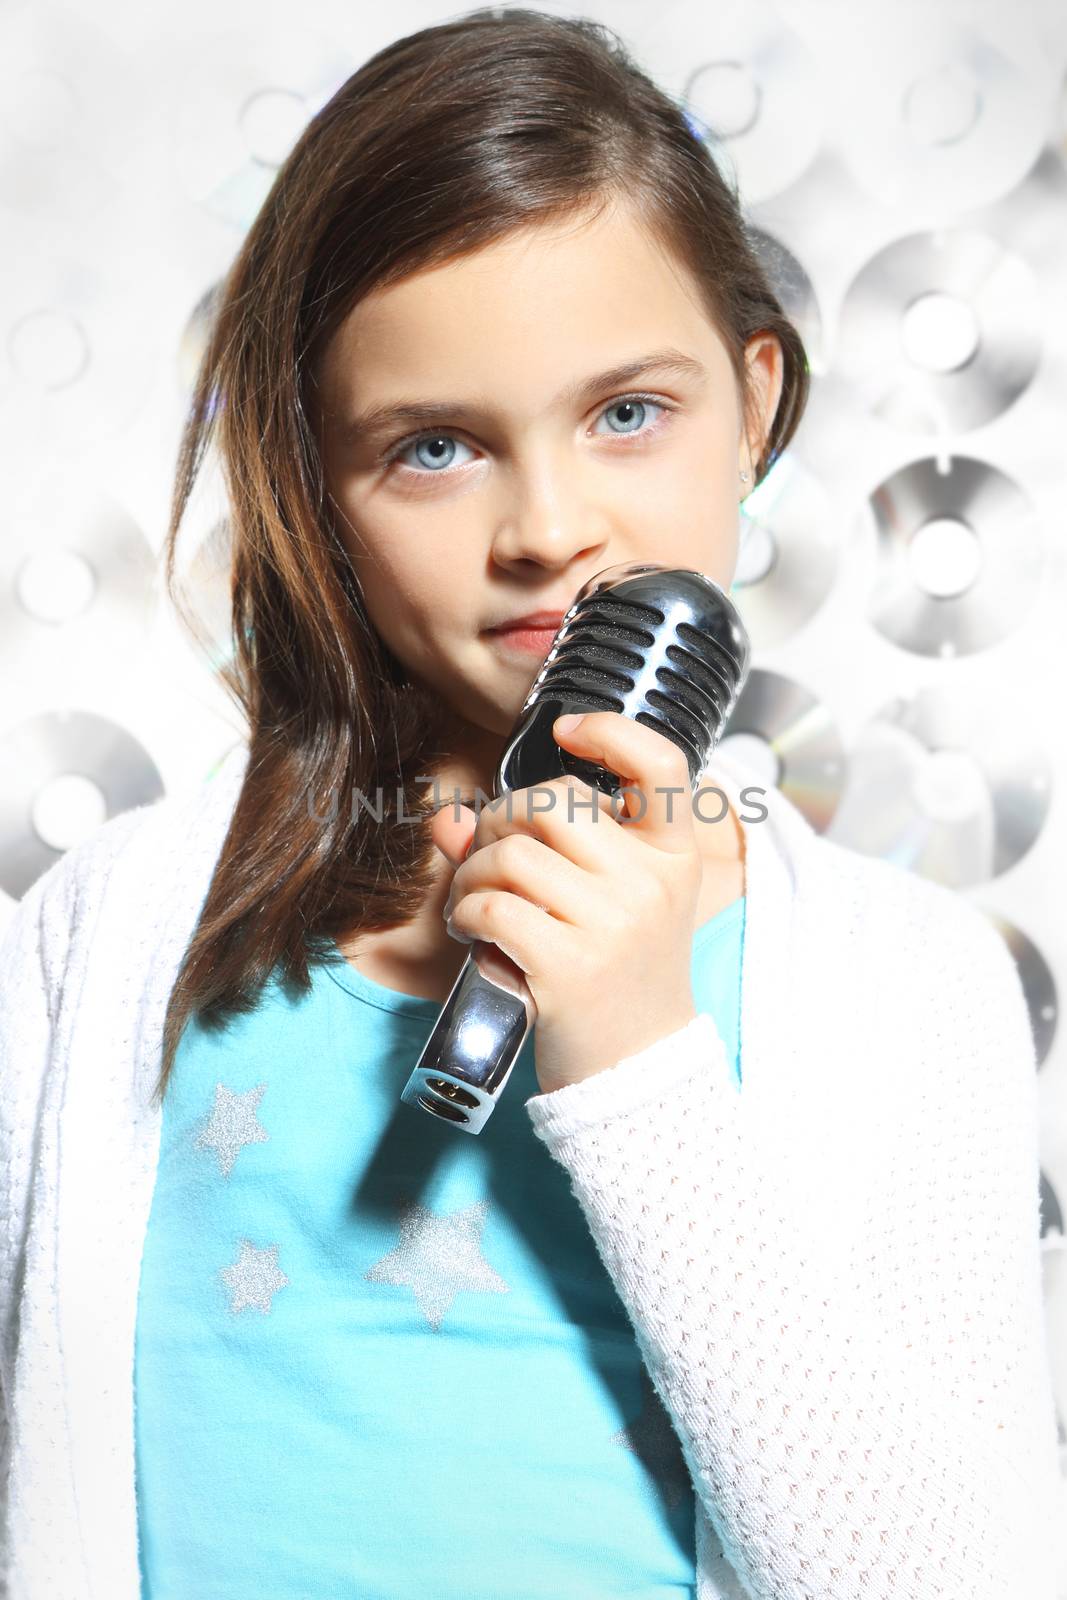 Child, teen, girl, singing into a microphone, a small singer